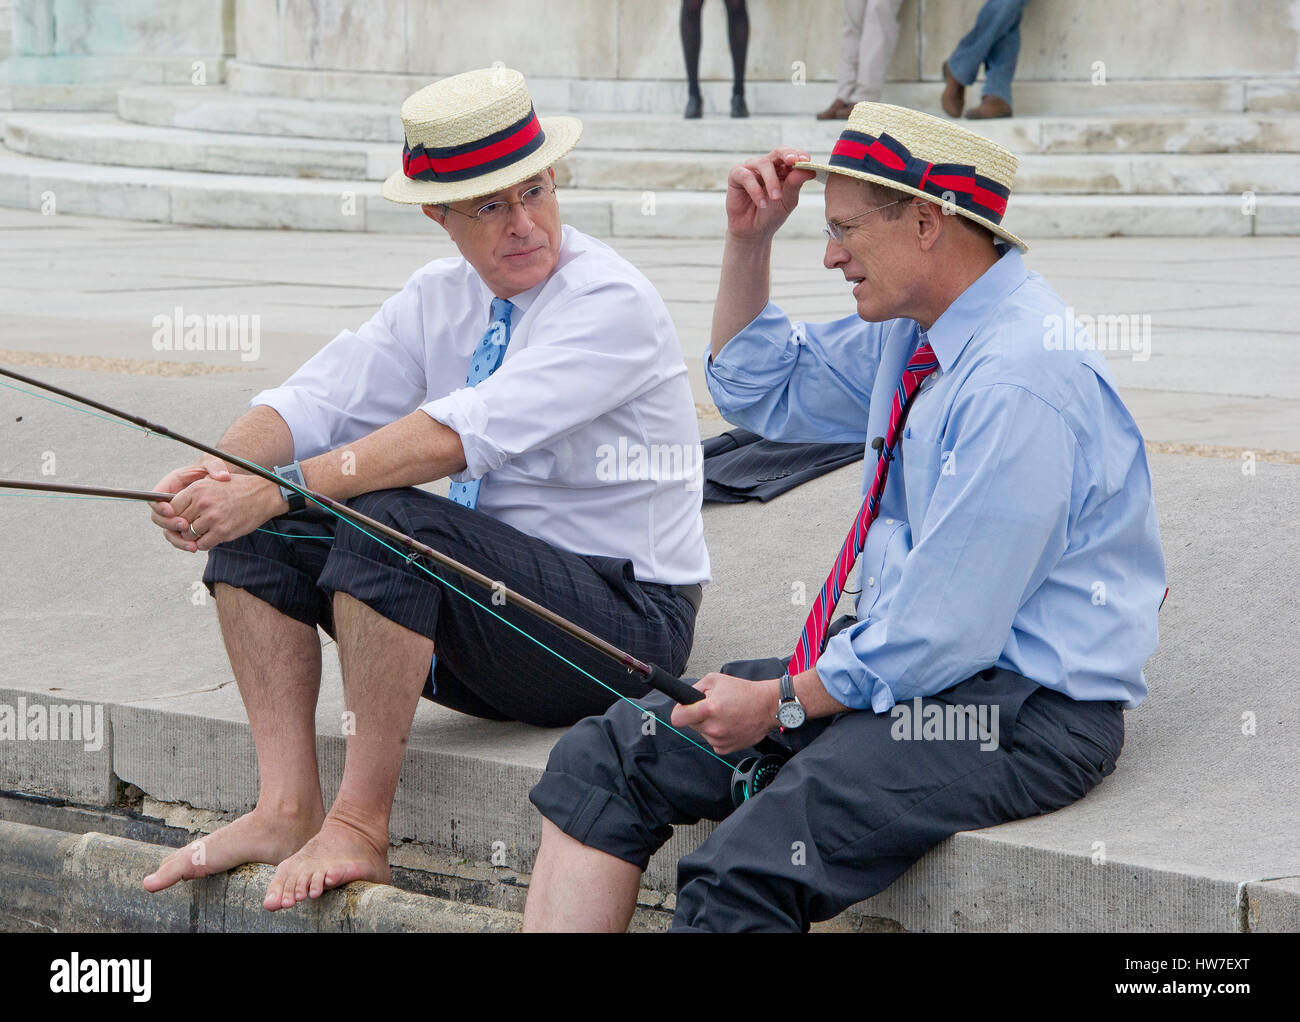 Stephen Colbert host of the Comedy Central show "The Colbert Report" works on bit with United States Representative Jack Kingston (Democrat of Georgia) where they appear to be fishing in U.S. Capitol Reflecting Pool in Washington D.C. on Friday October 3 Stock Photo